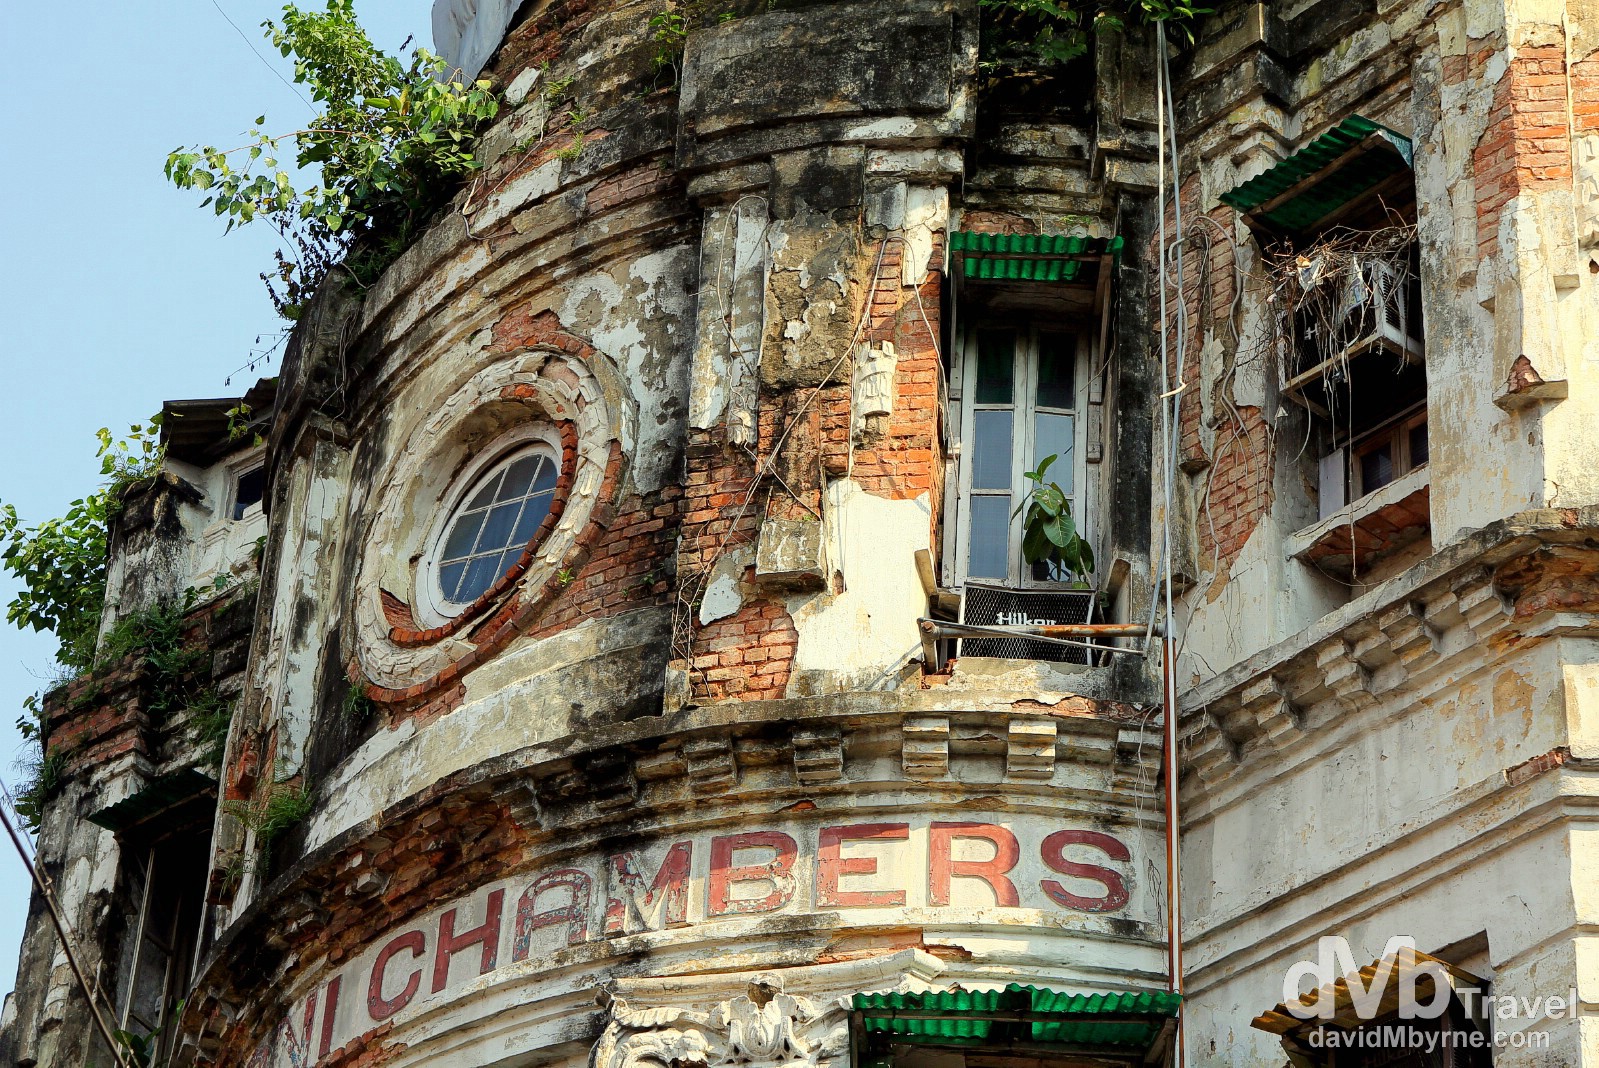 The crumbling façade of the Futani Chambers building in the BBD Bagh area of Calcutta, West Bengal, India. October 15th 2012.